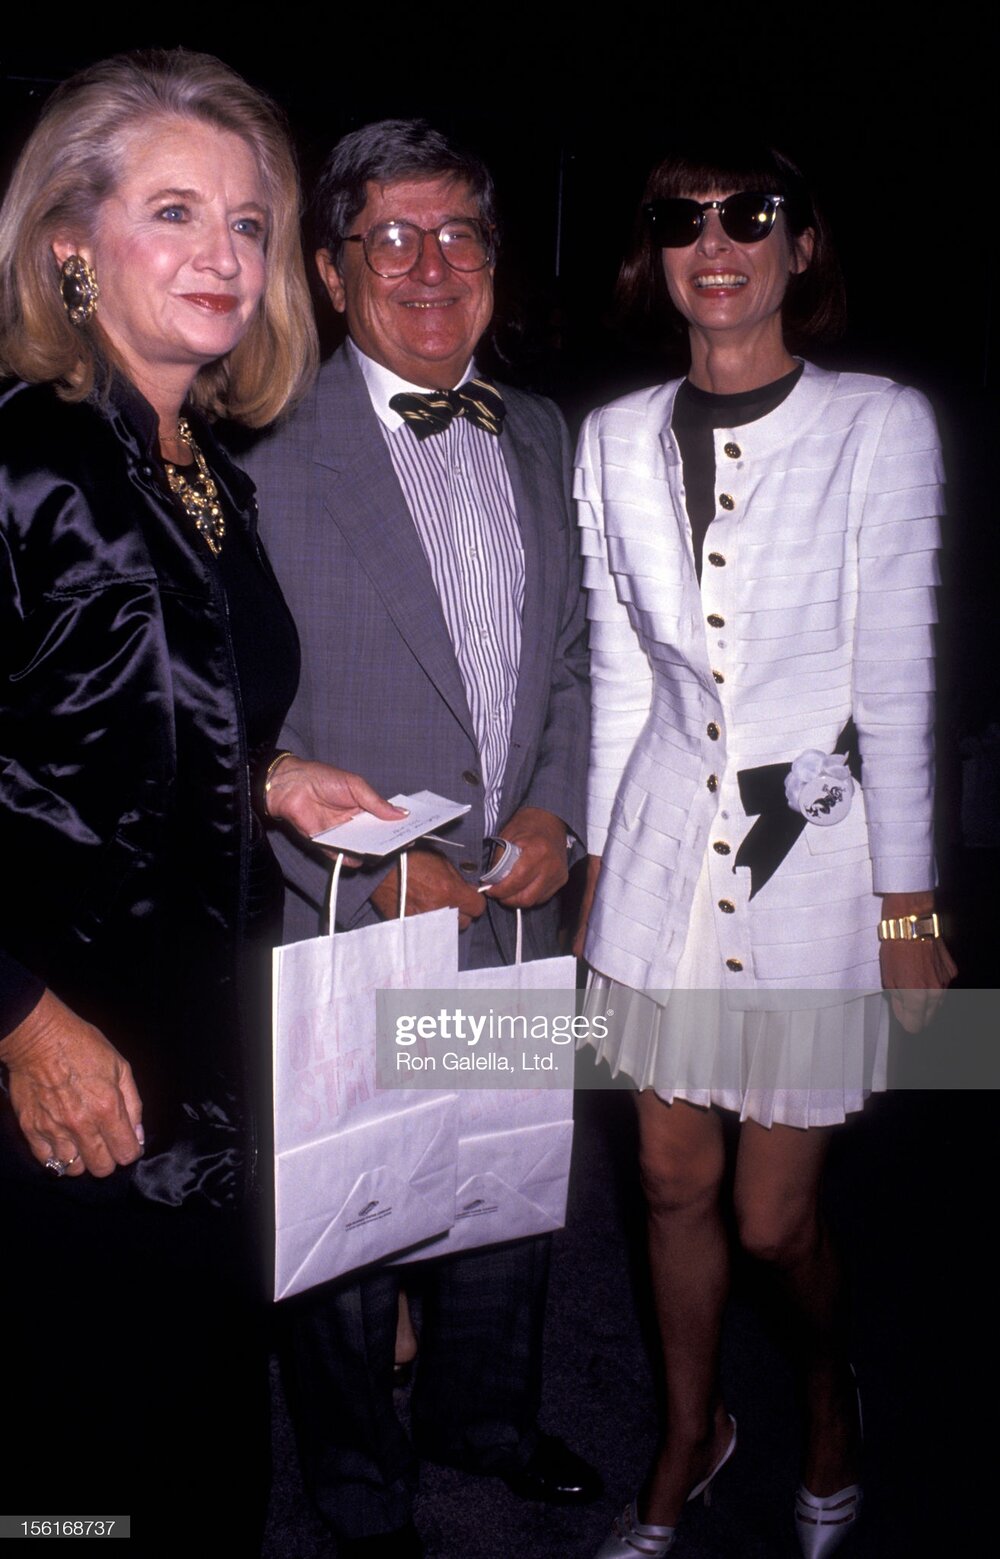 Shirley Lord, Abe Rosenthal and Anna Wintour attend Chanel Presents 'Off The Street' Fashion Show on September 12, 1991 at Bergdorf Goodman.